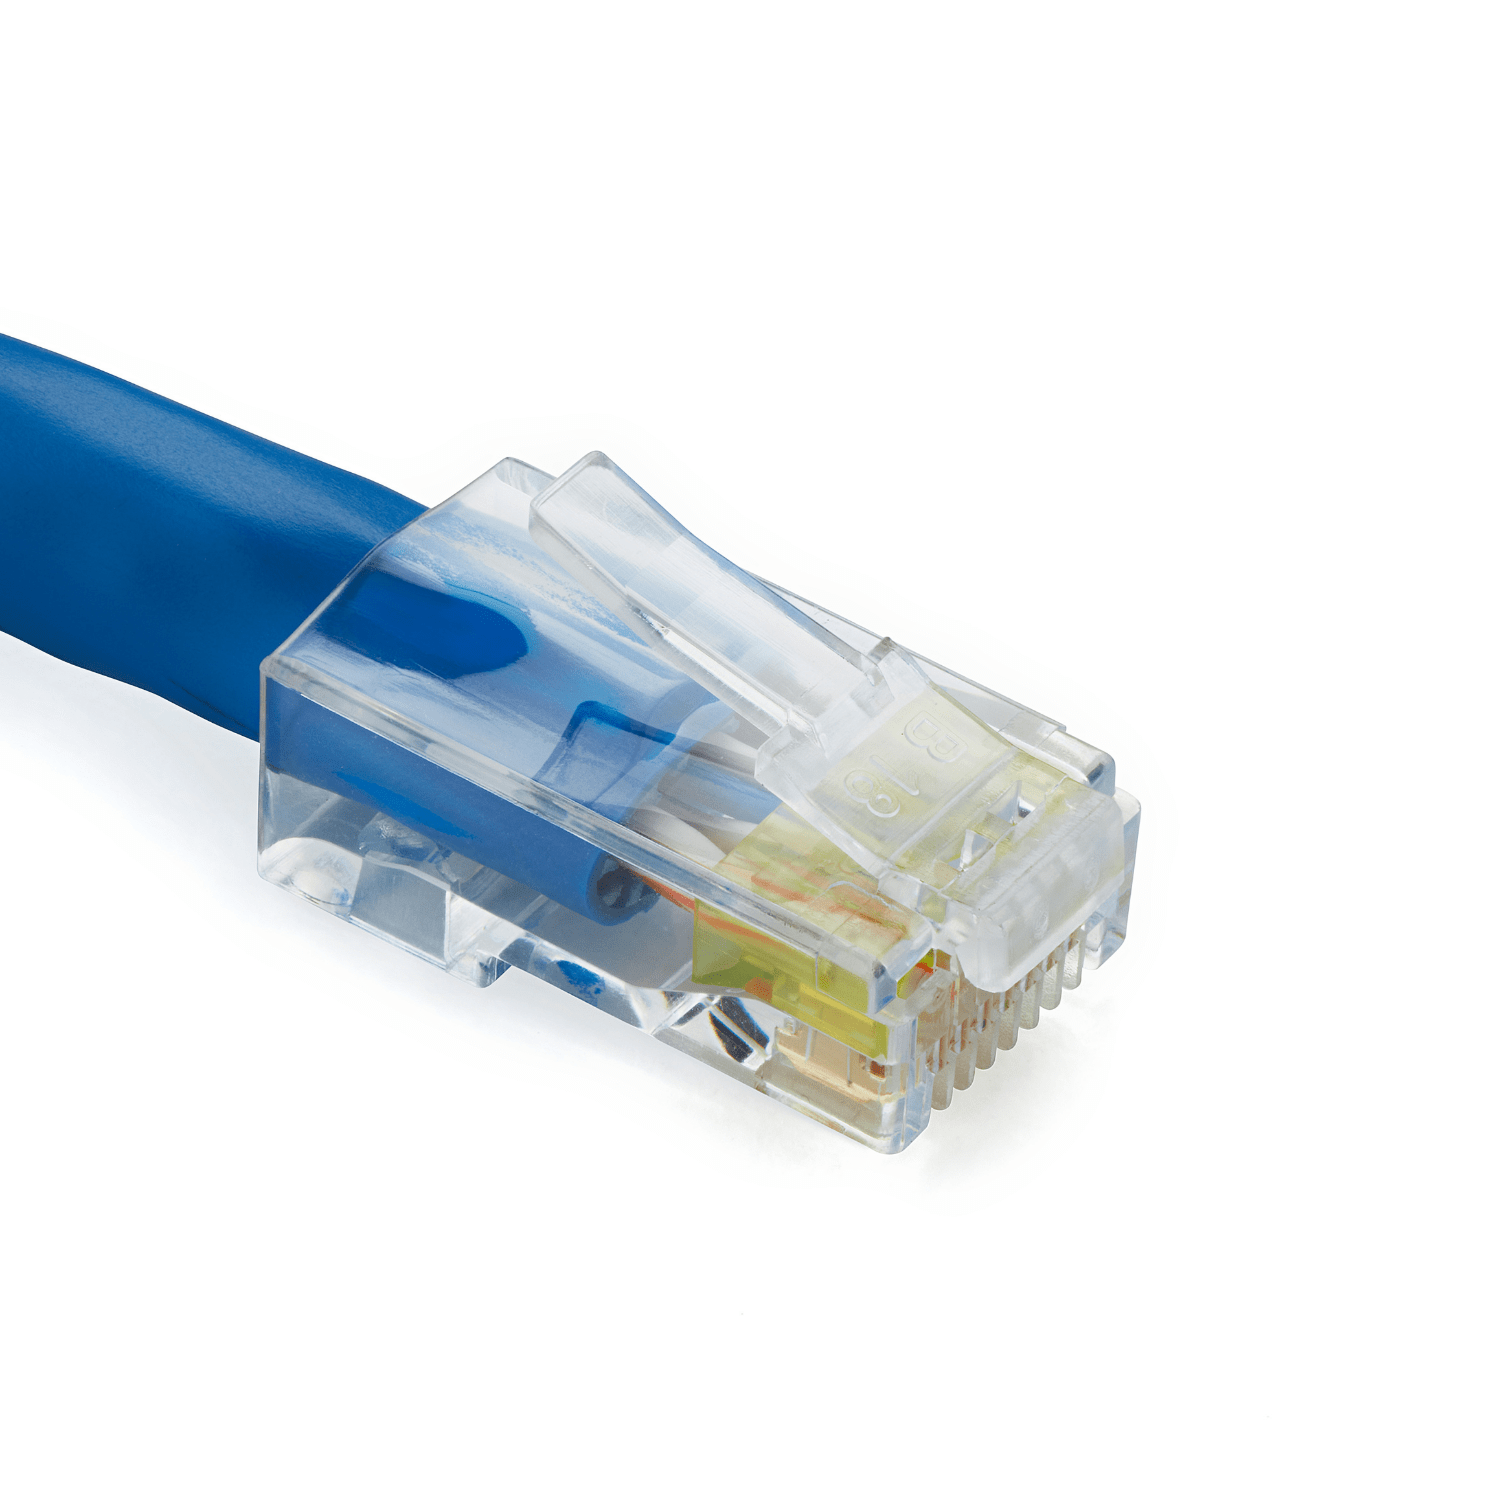 Ruggedized, Shielded, and Armored Cables are Ready for Duty